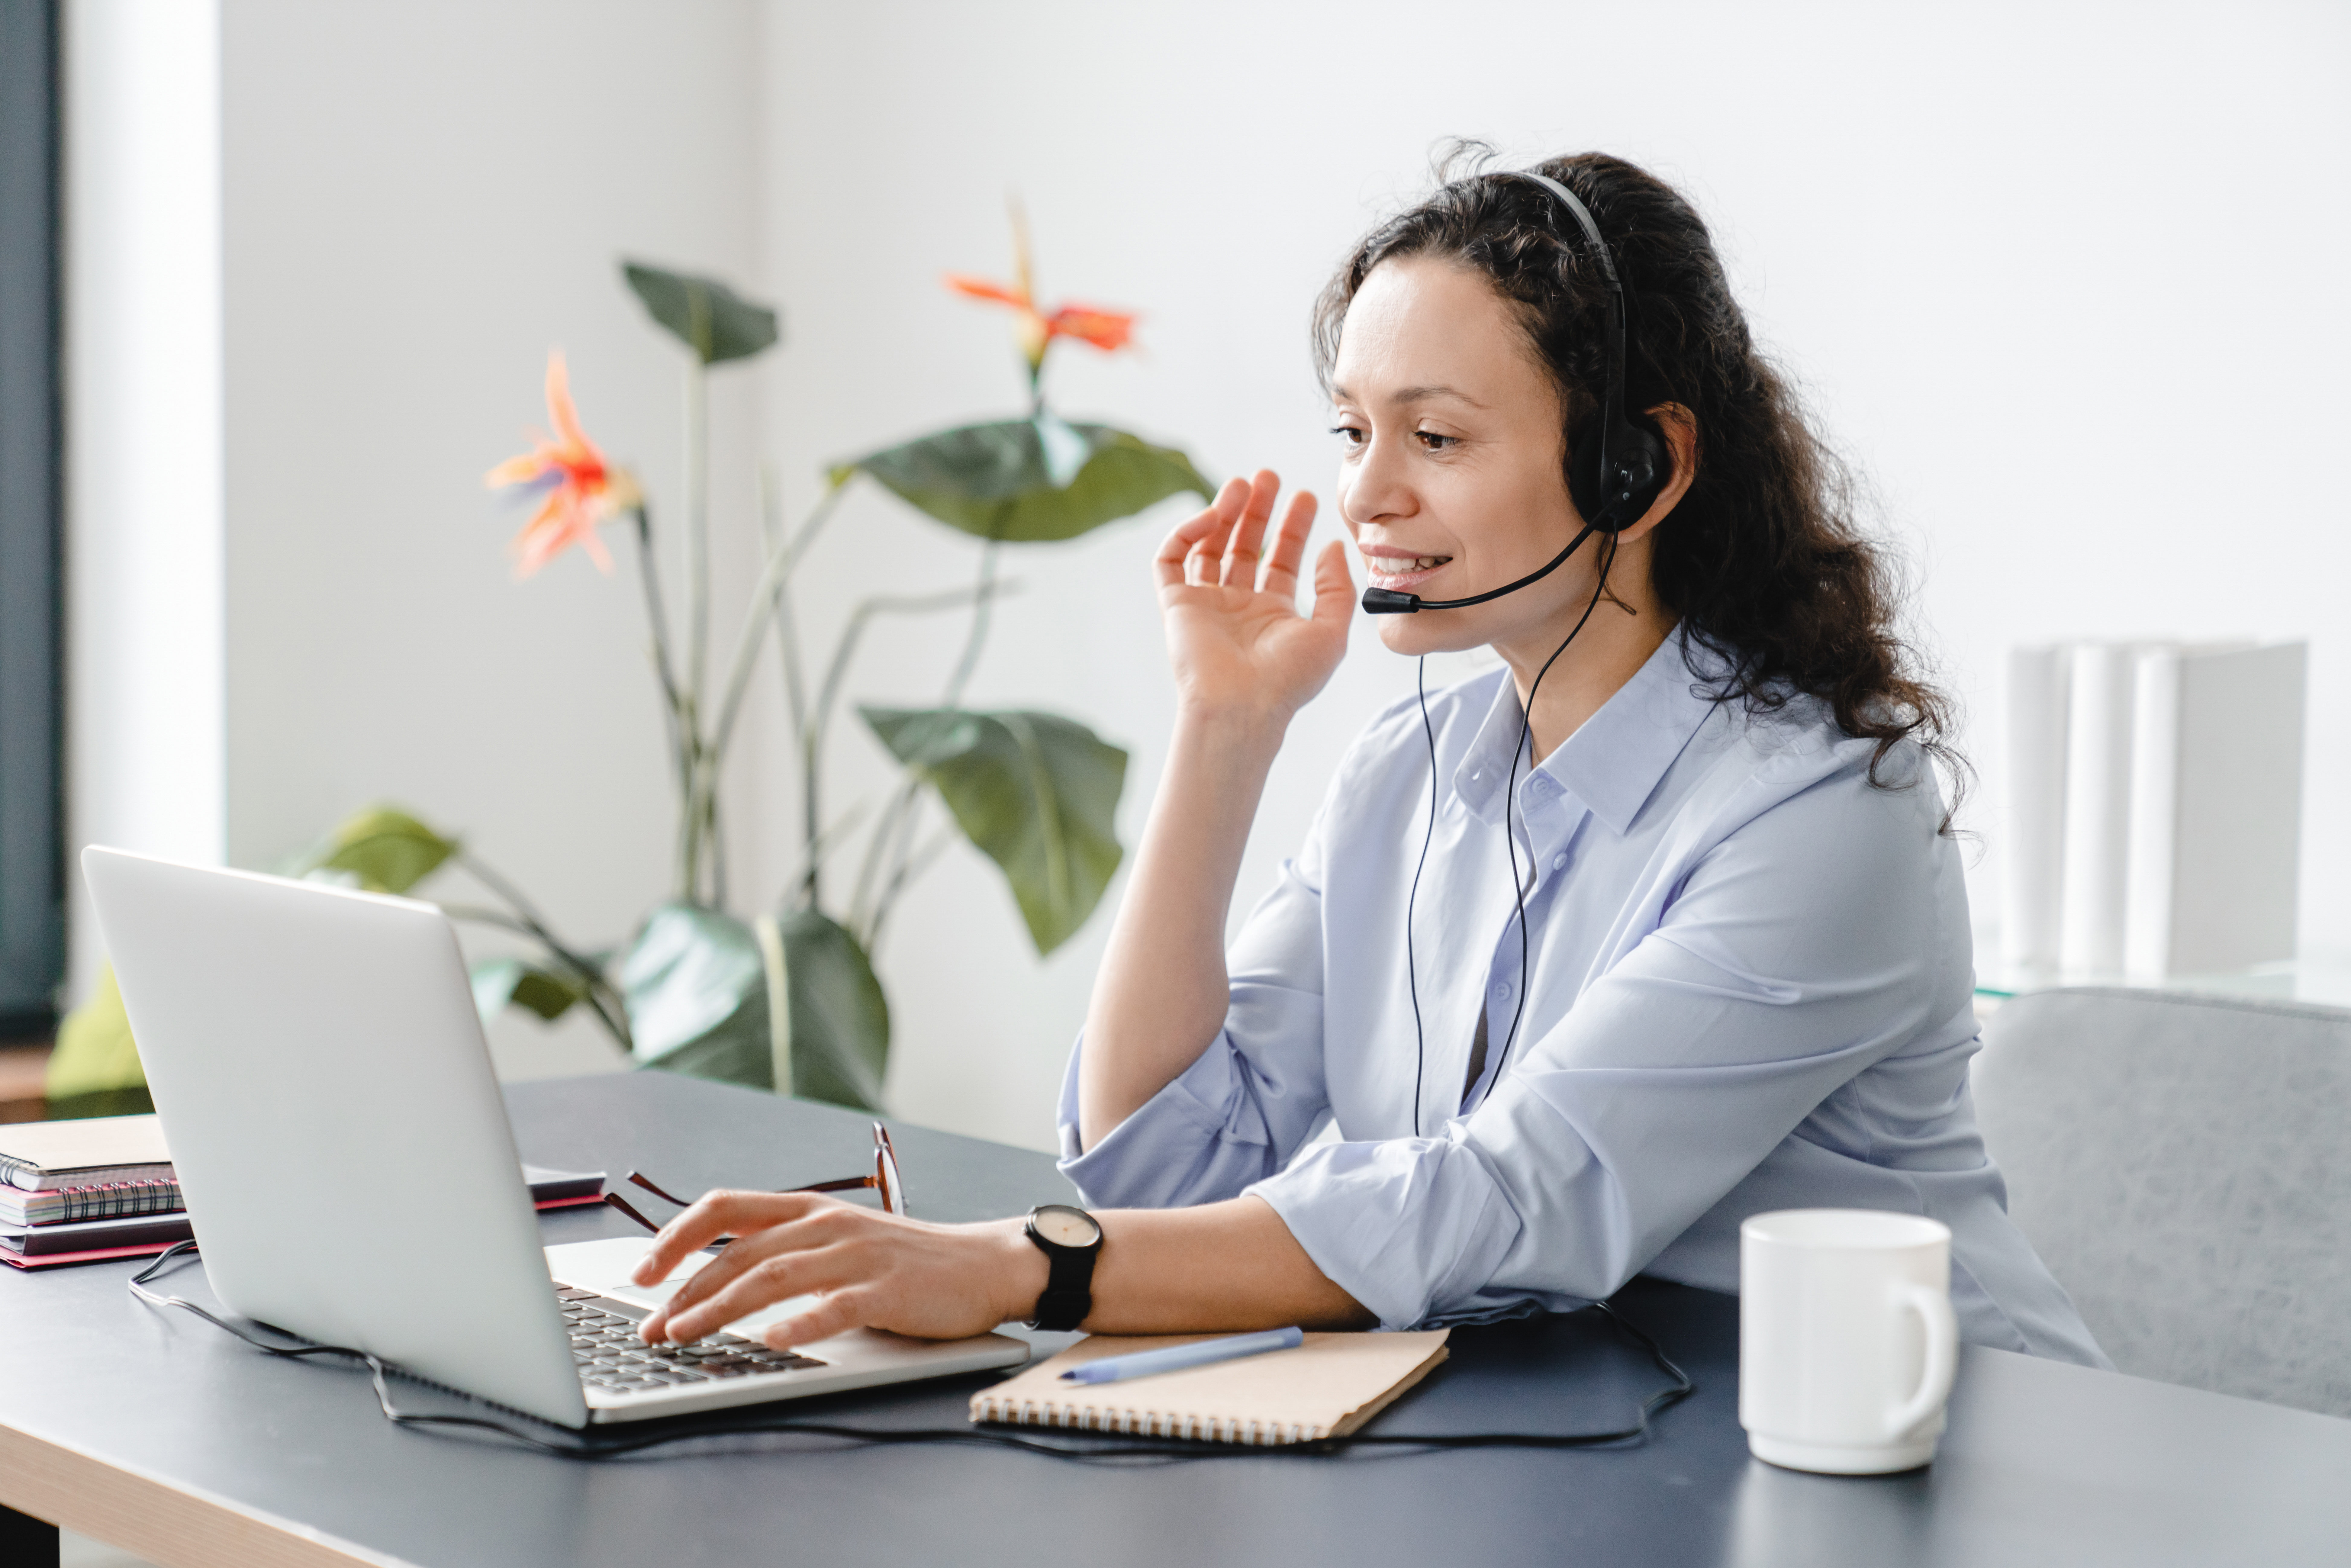 How to Turn Call Center Call Escalation to Your Advantage